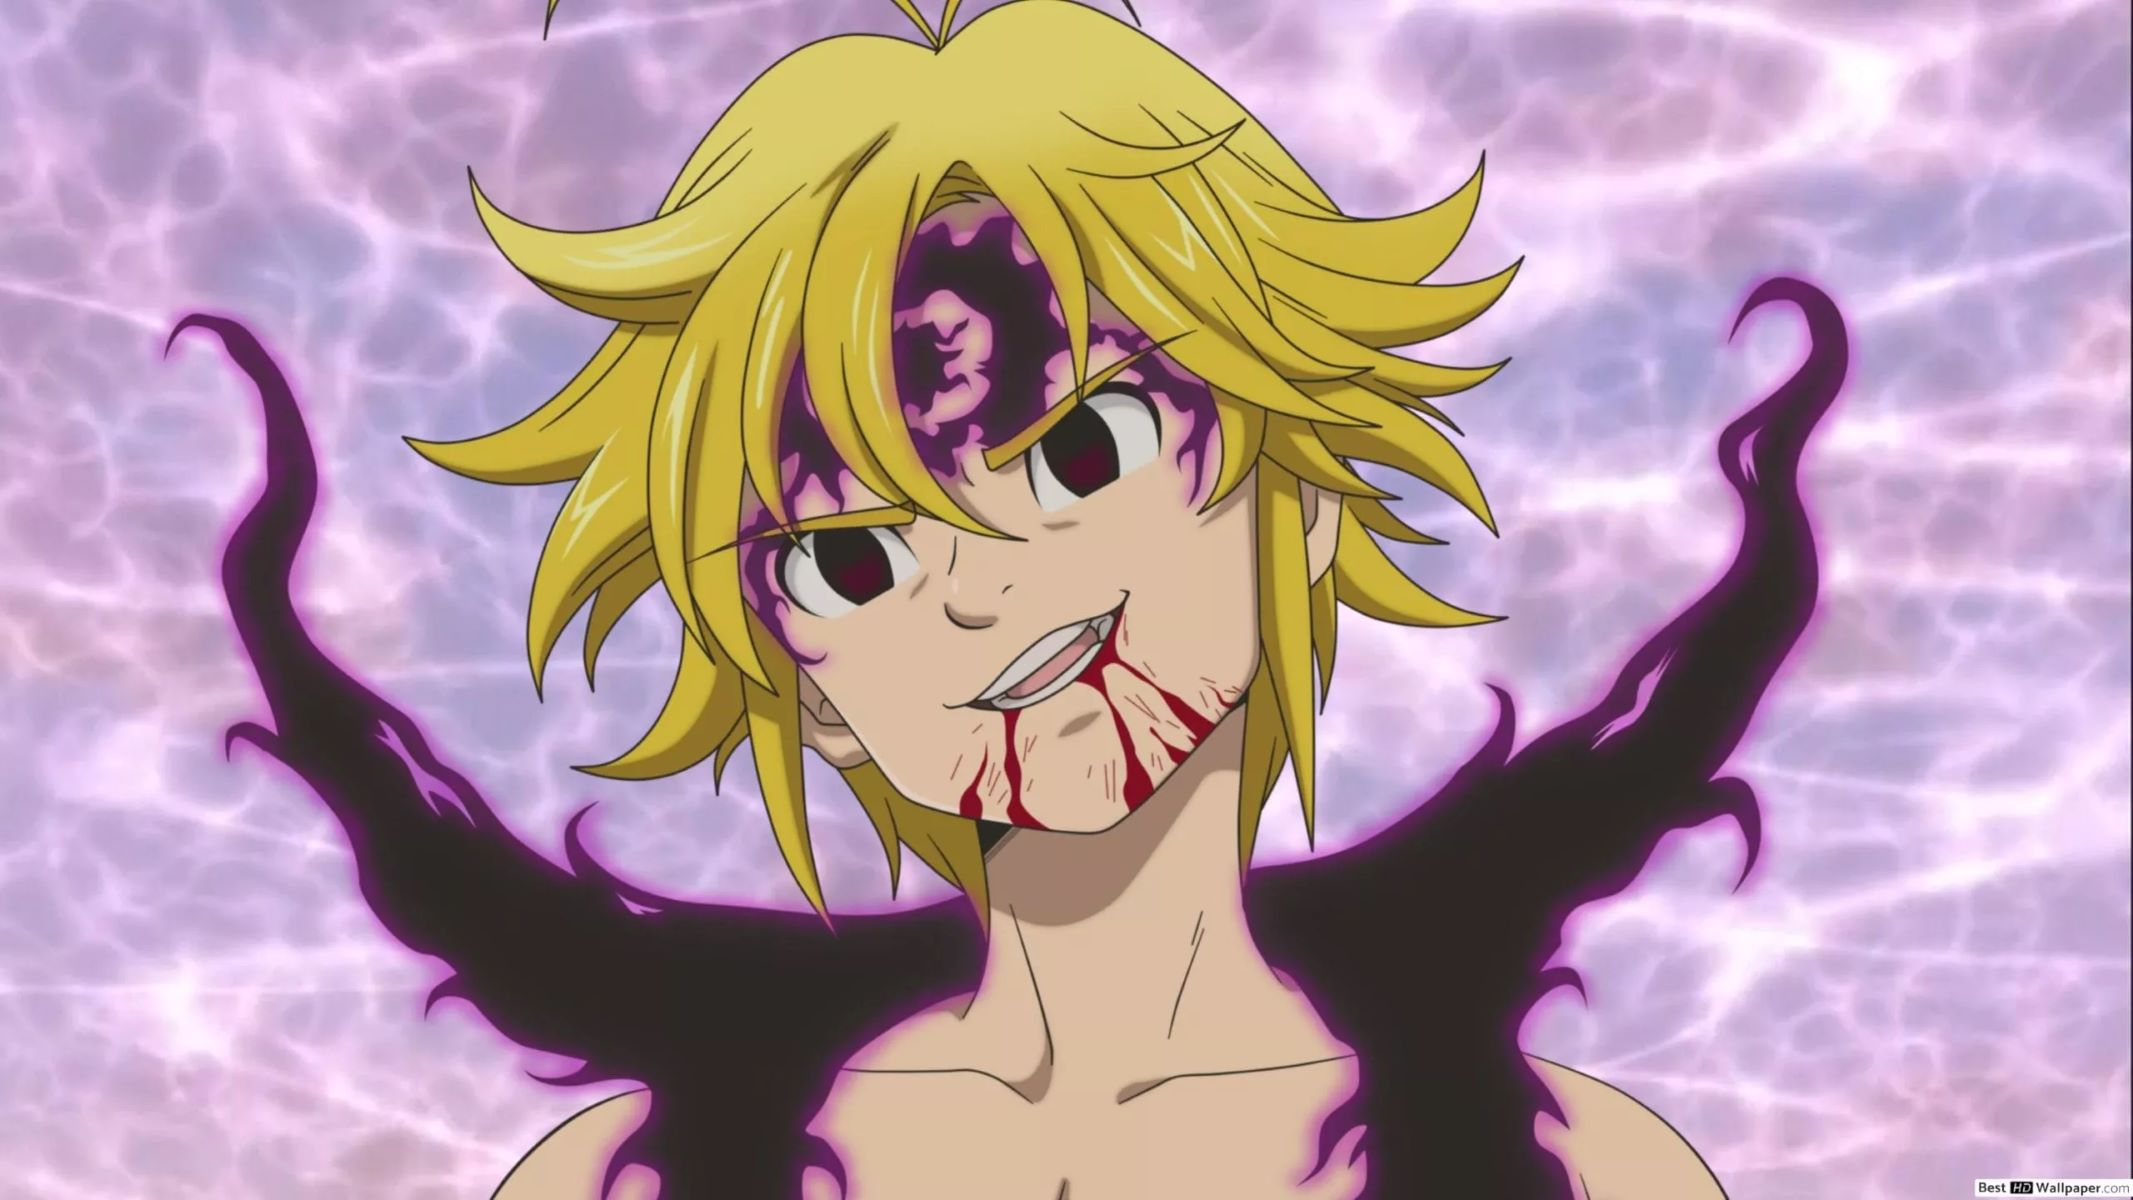 The Mind-Blowing Power Level Of Meliodas In The Epic Final Arc Of Seven Deadly Sins!